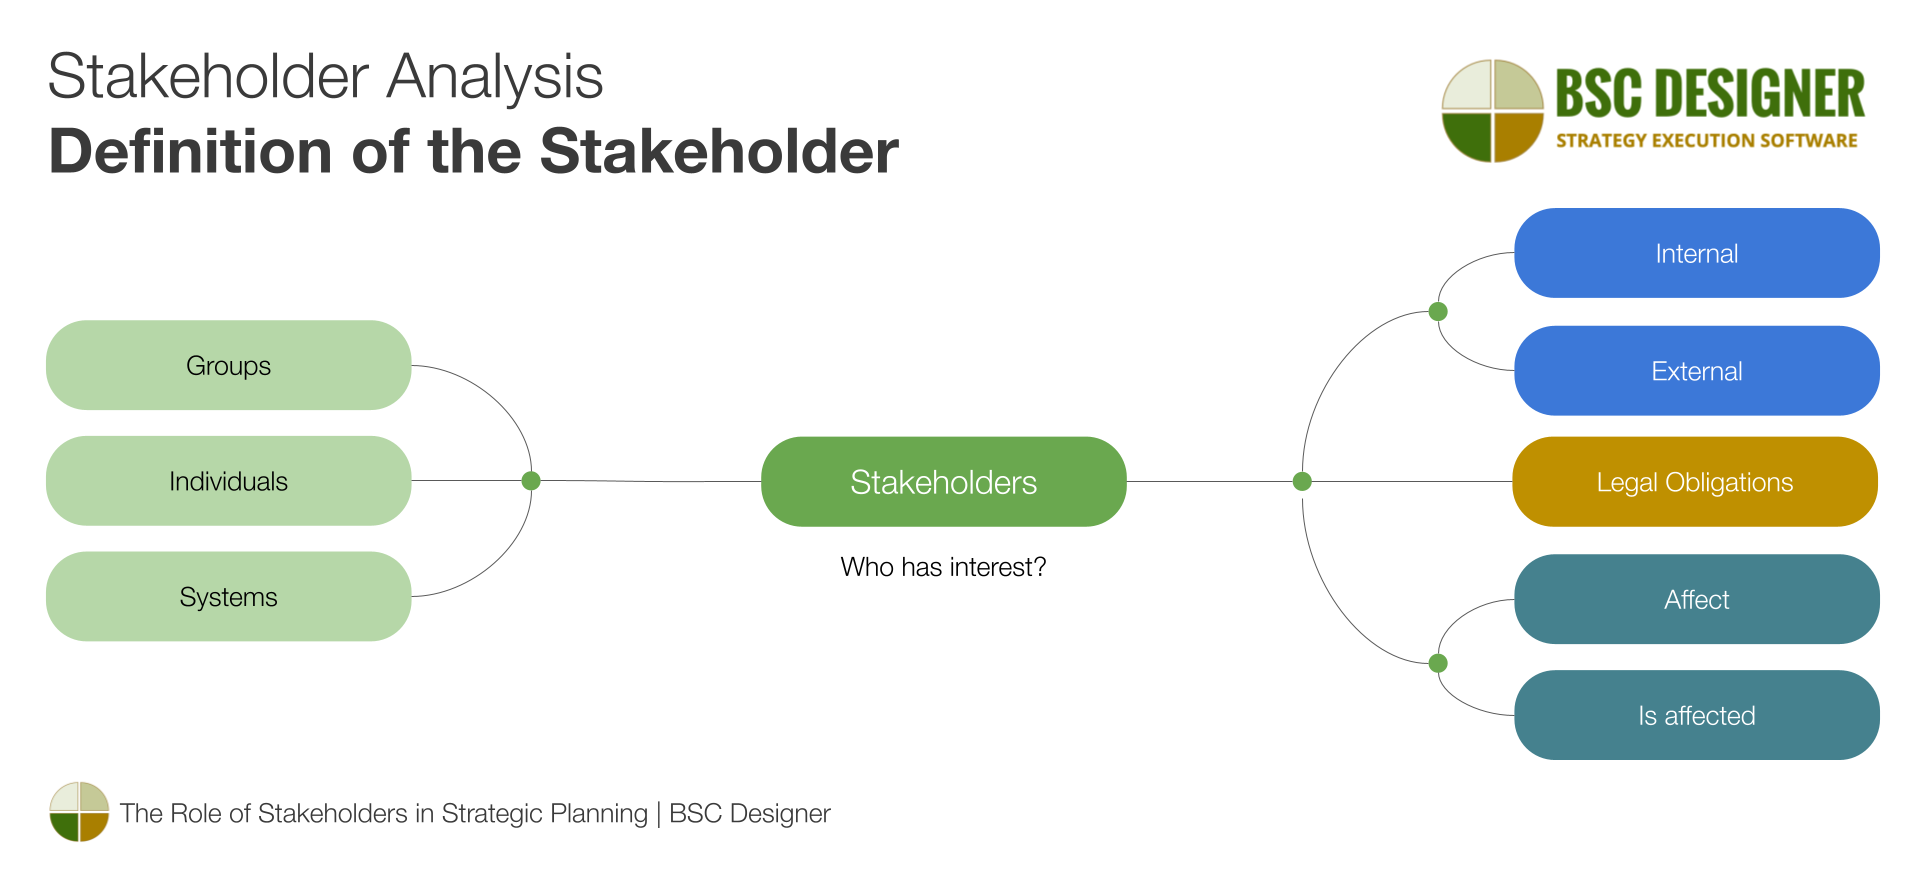 Stakeholder Analysis Definition of the Stakeholder